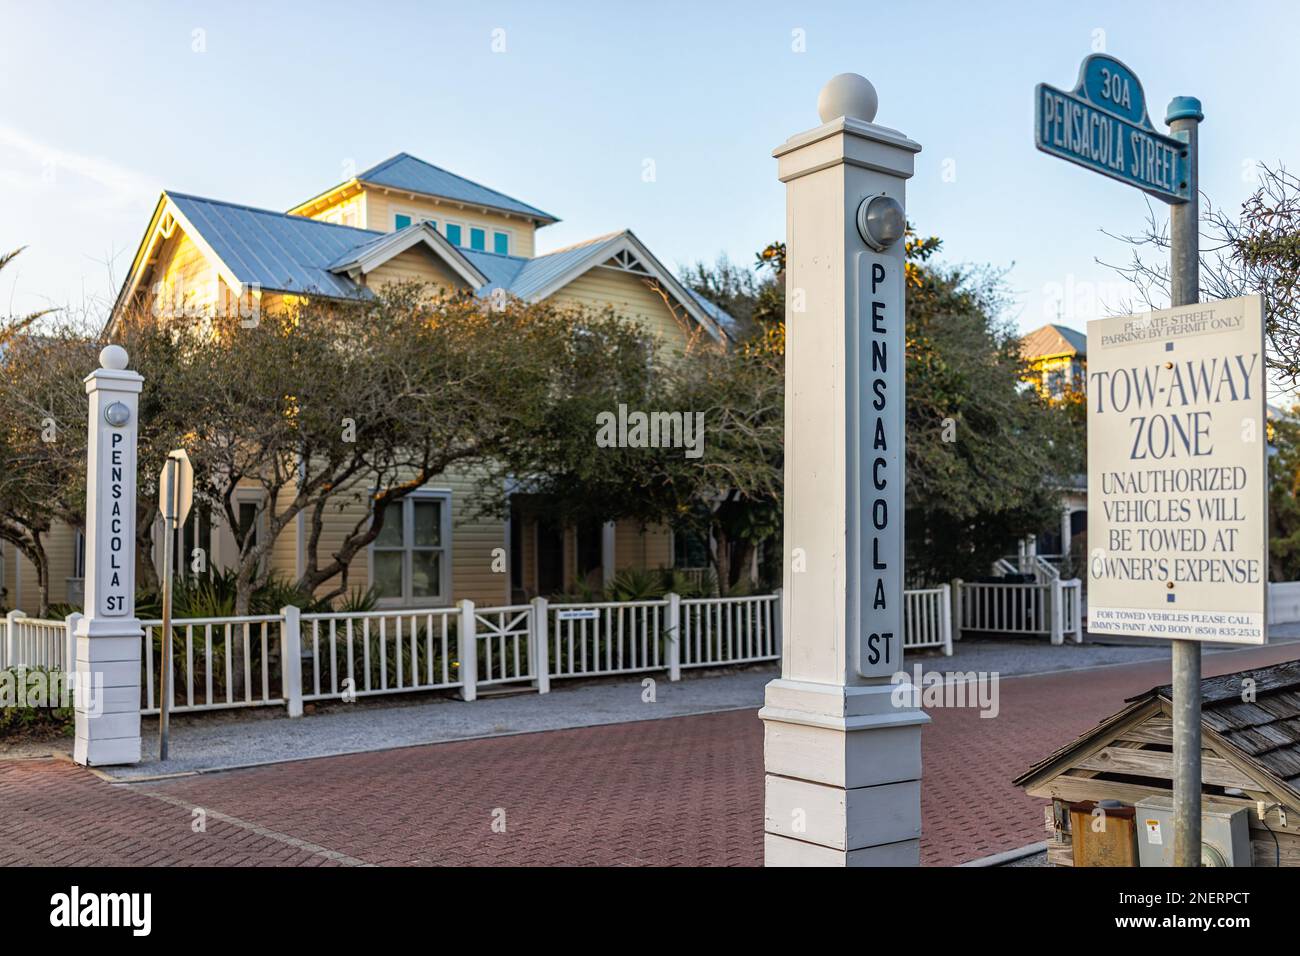 Seaside, USA - January 14, 2021: Modern buildings in new urbanism architecture by beach at Seaside, Florida in winter sunset with parking sign and Pen Stock Photo